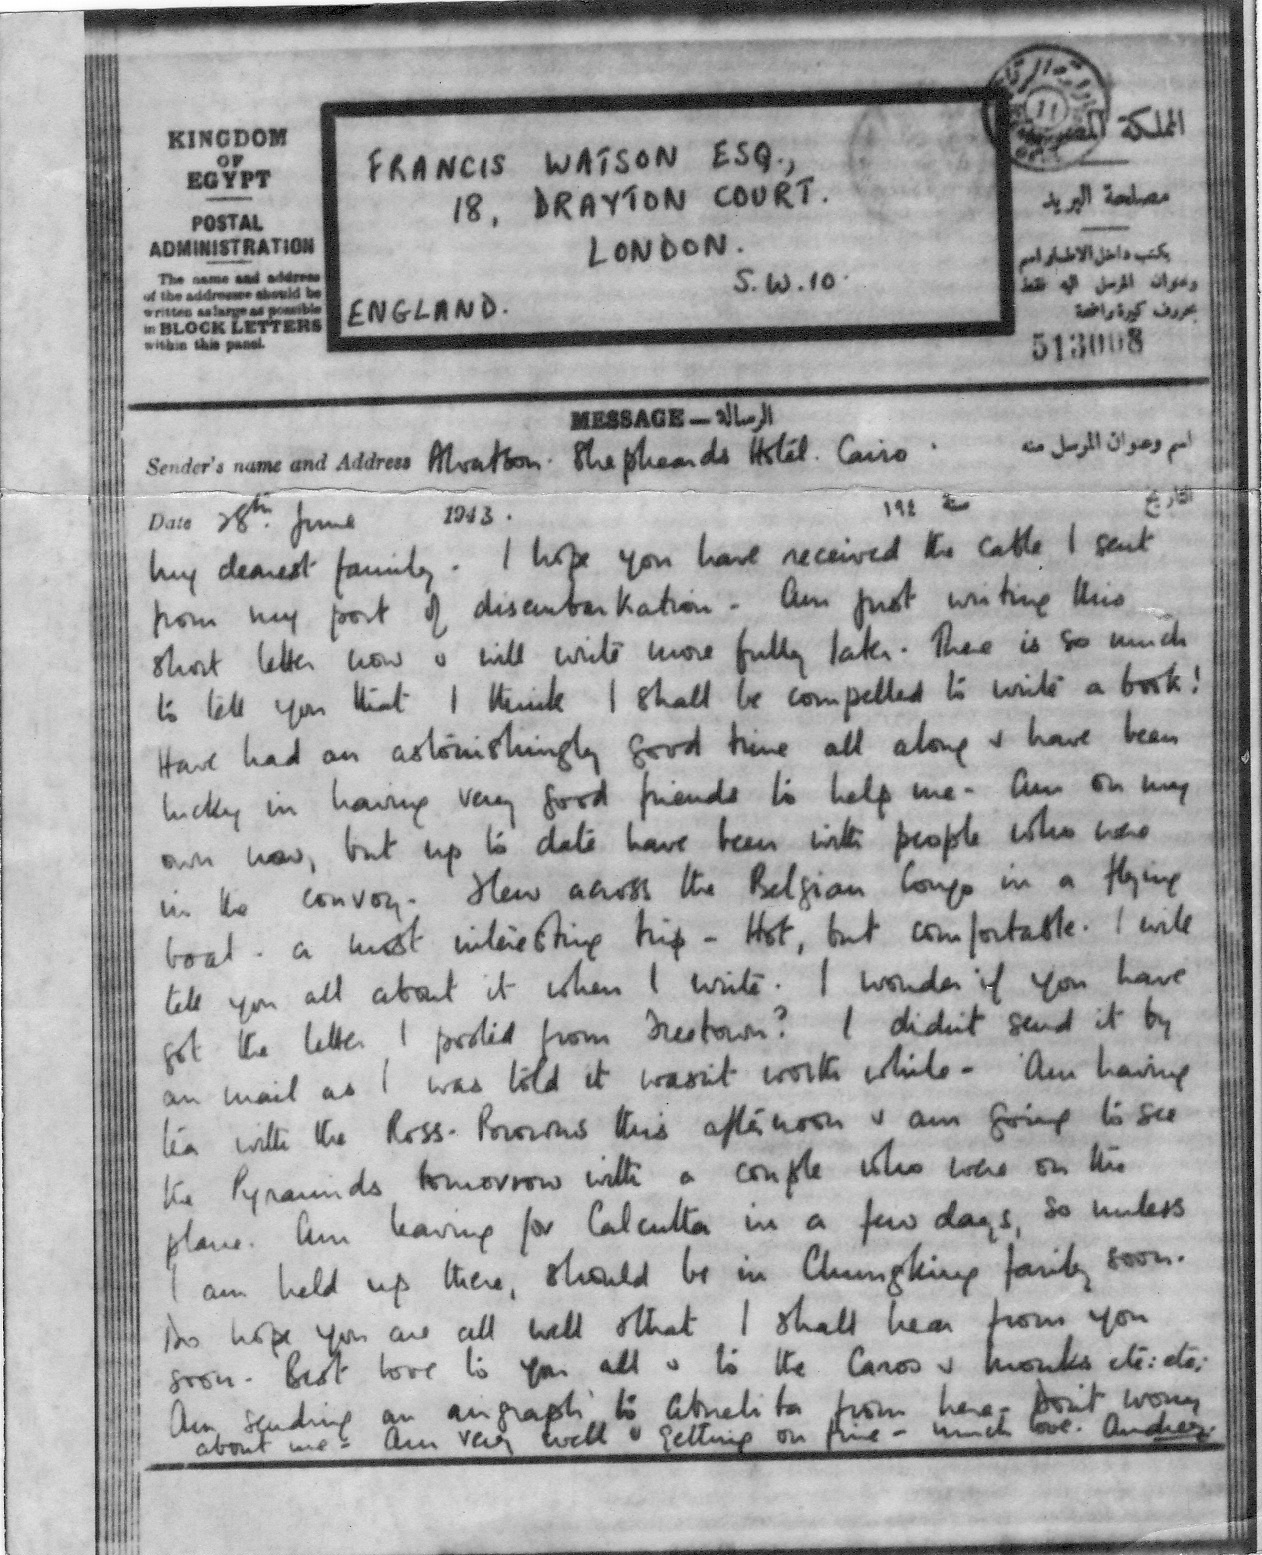 Audrey's letter to her family from Cairo, 1943